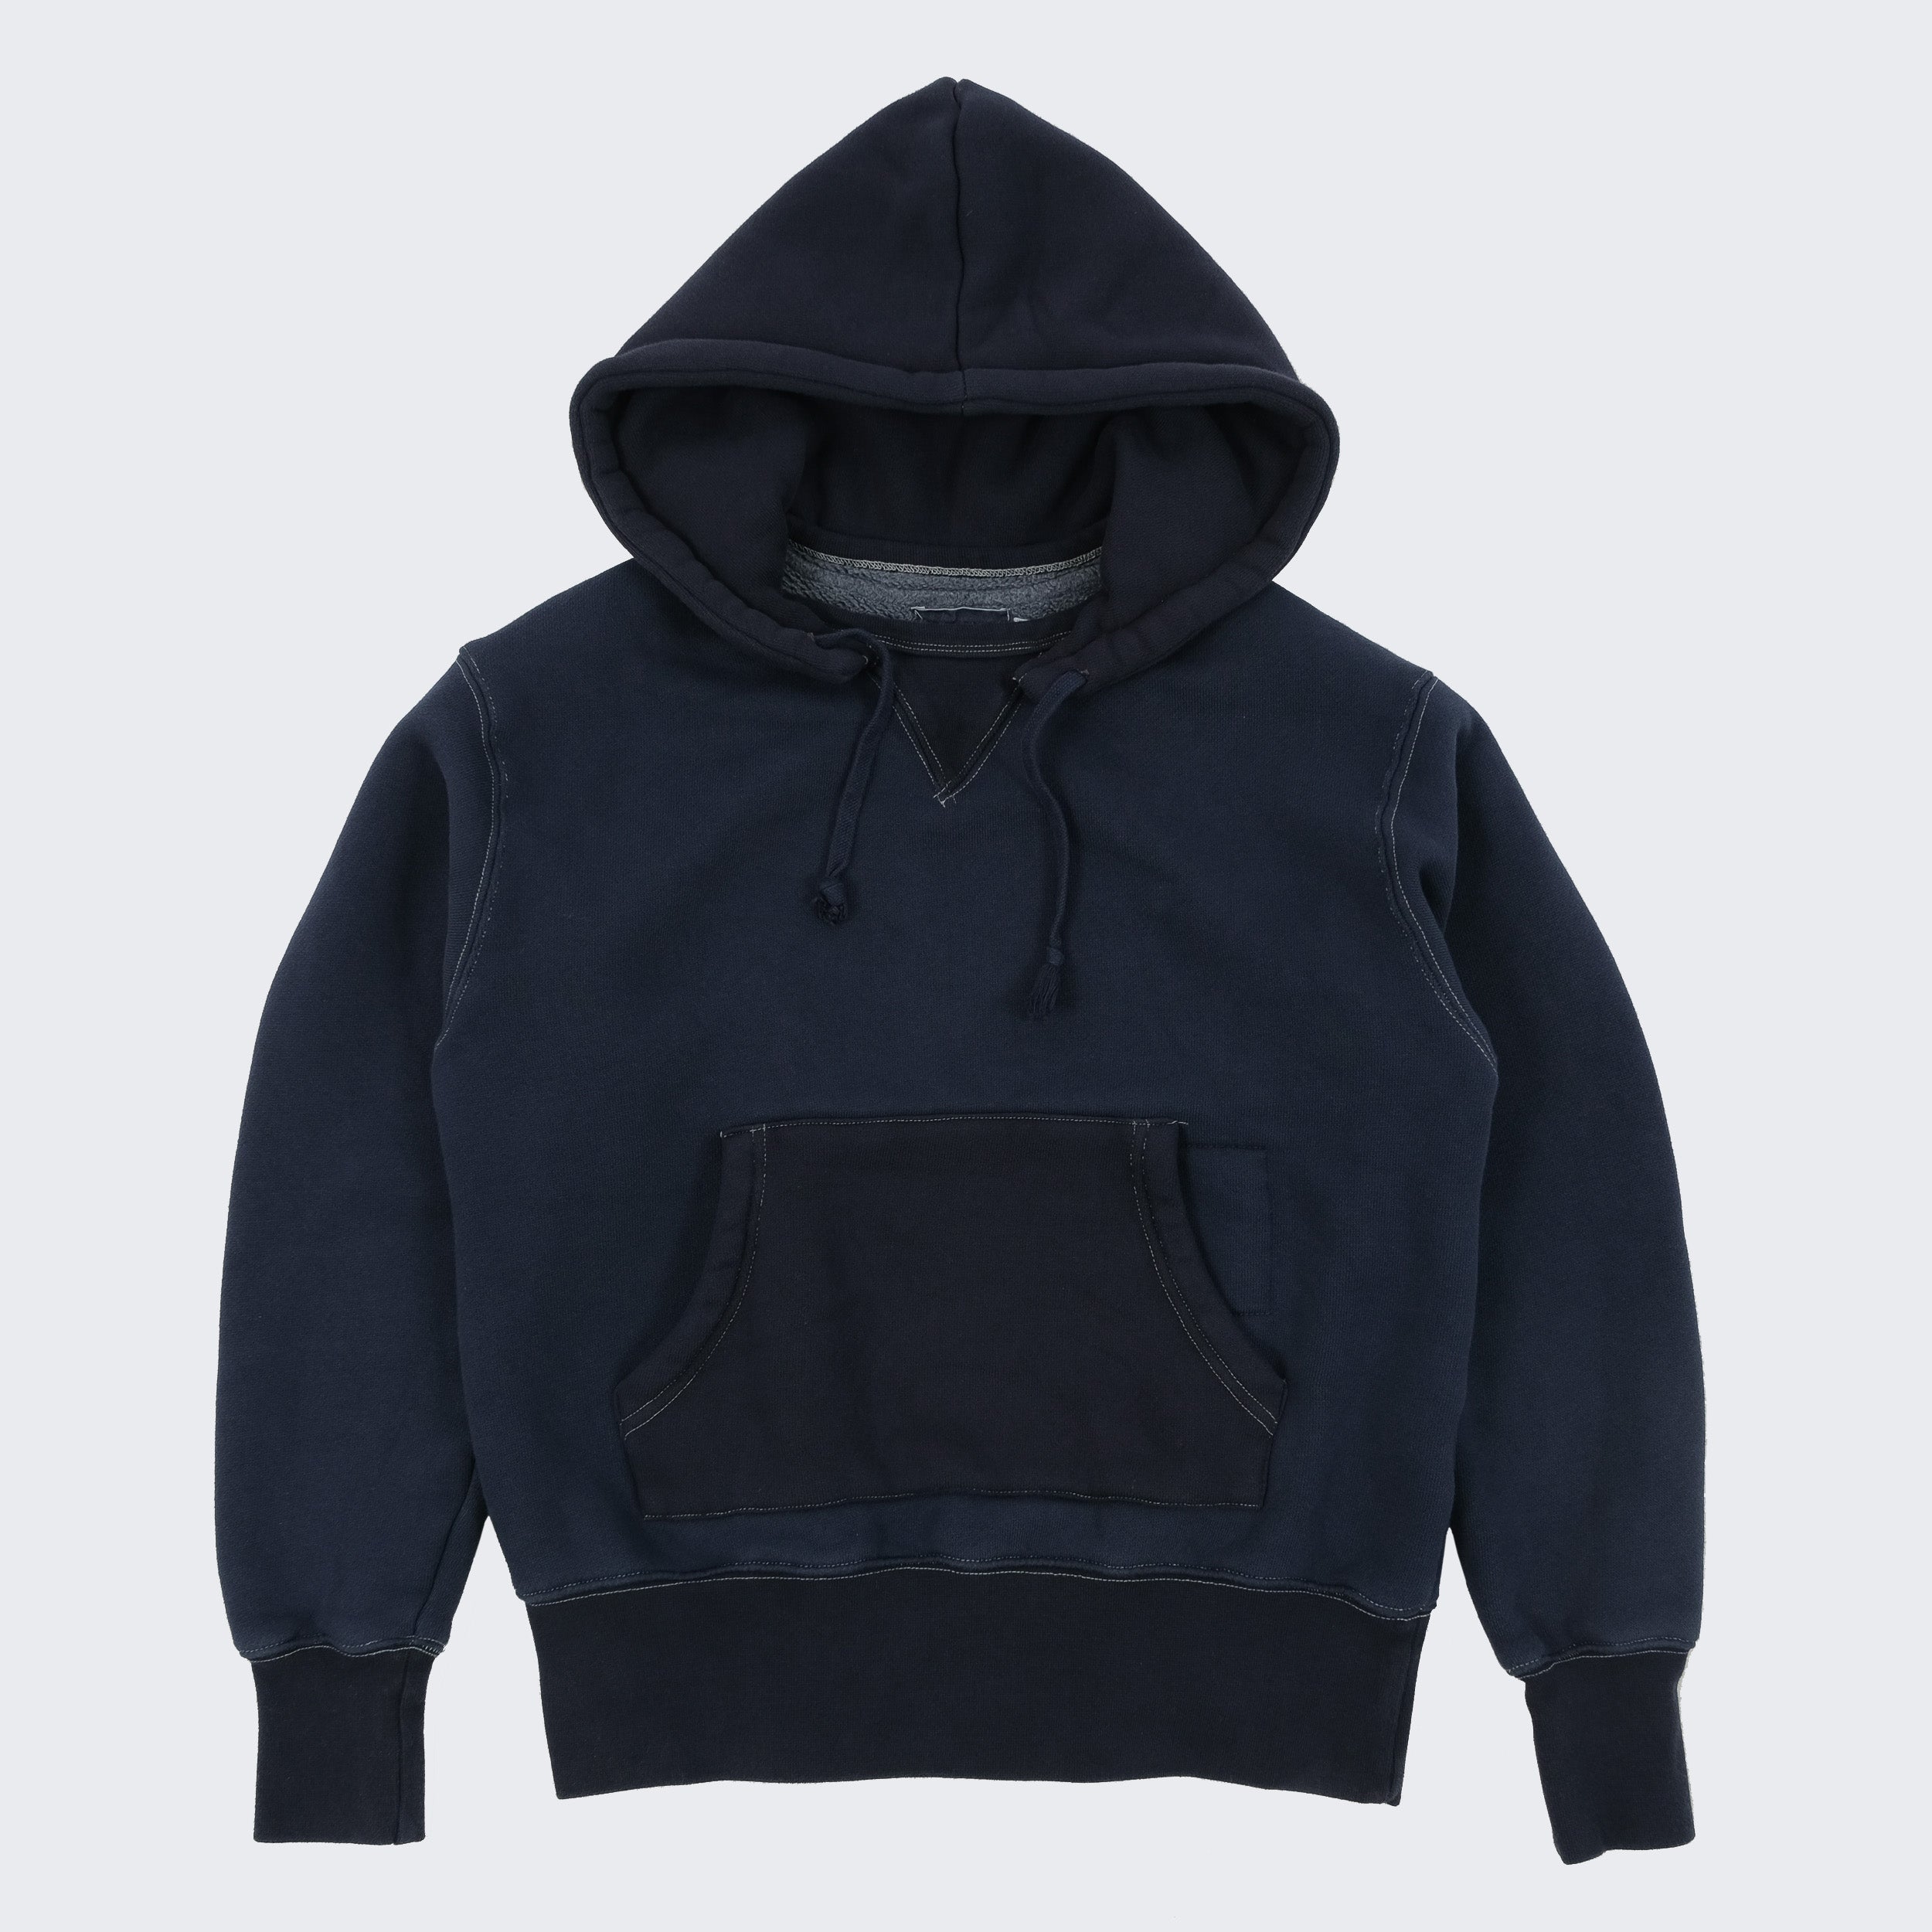 BRUT Special Hoodie Men's sweatshirt - Design from our archives